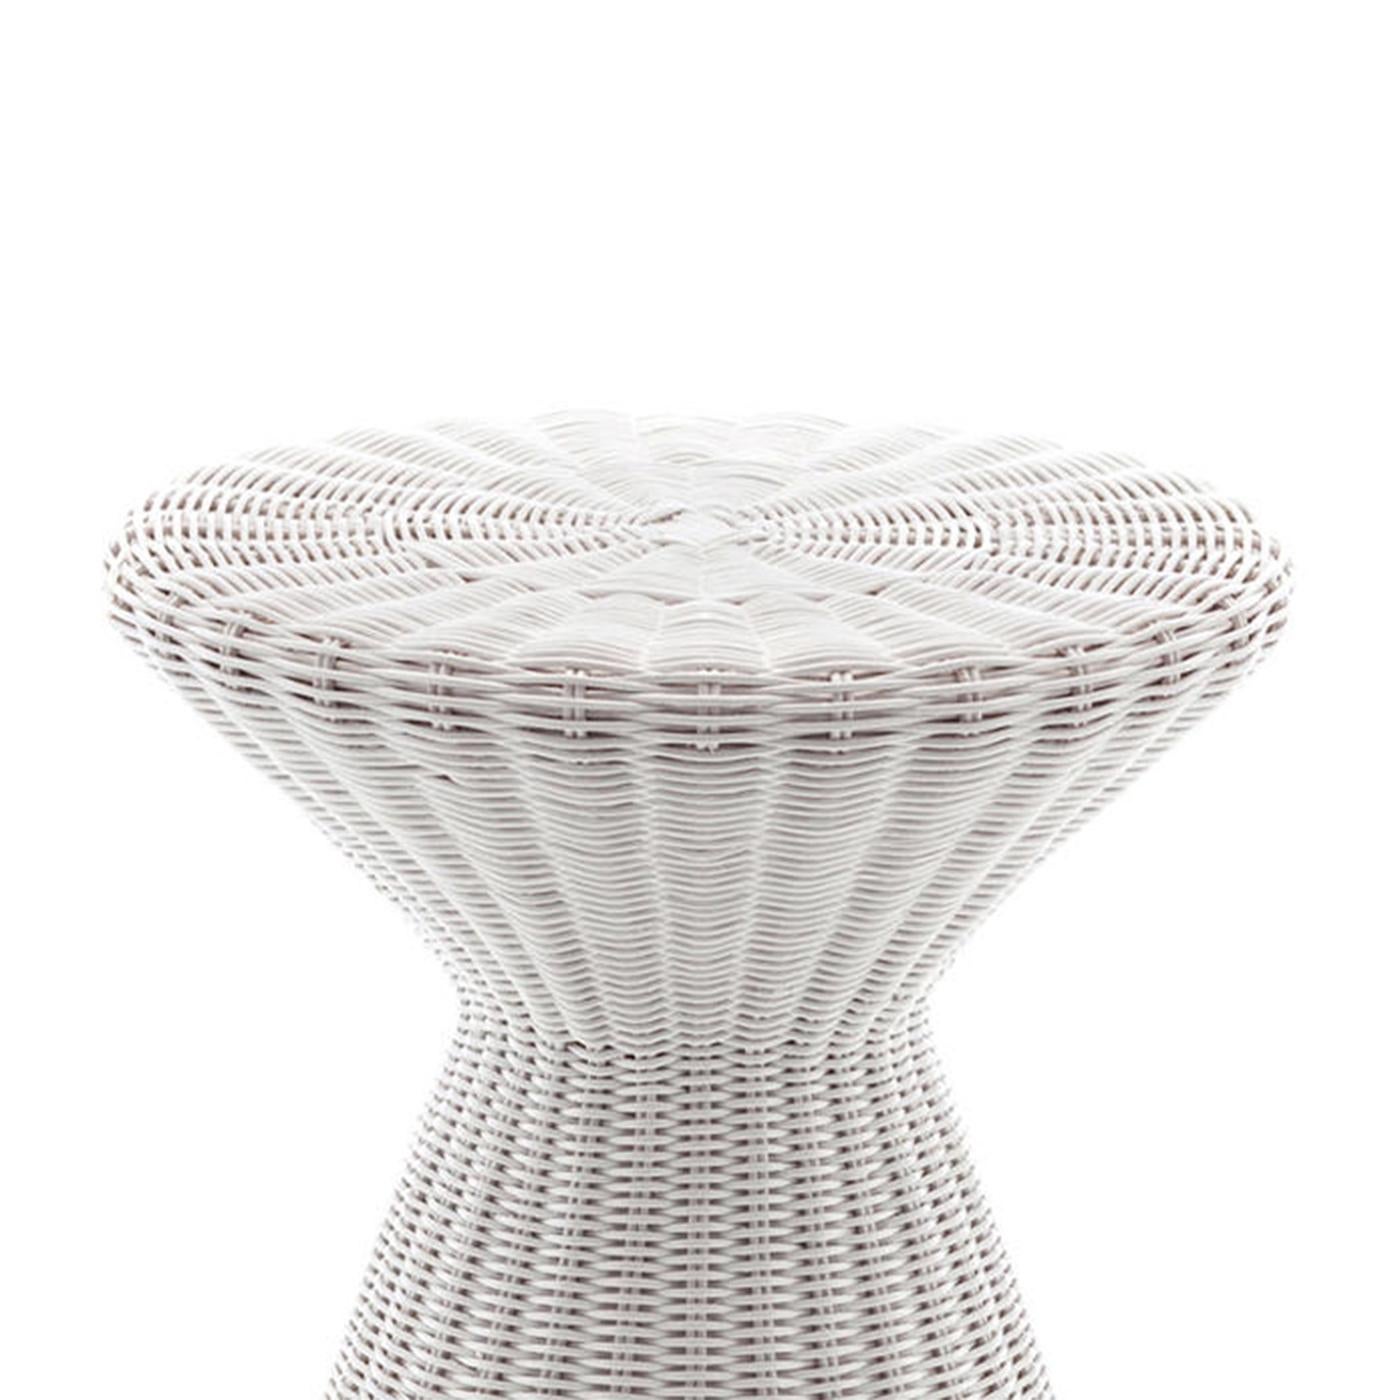 Side table coil white all
in handwoven rattan core, 
strong braided. In white finish.